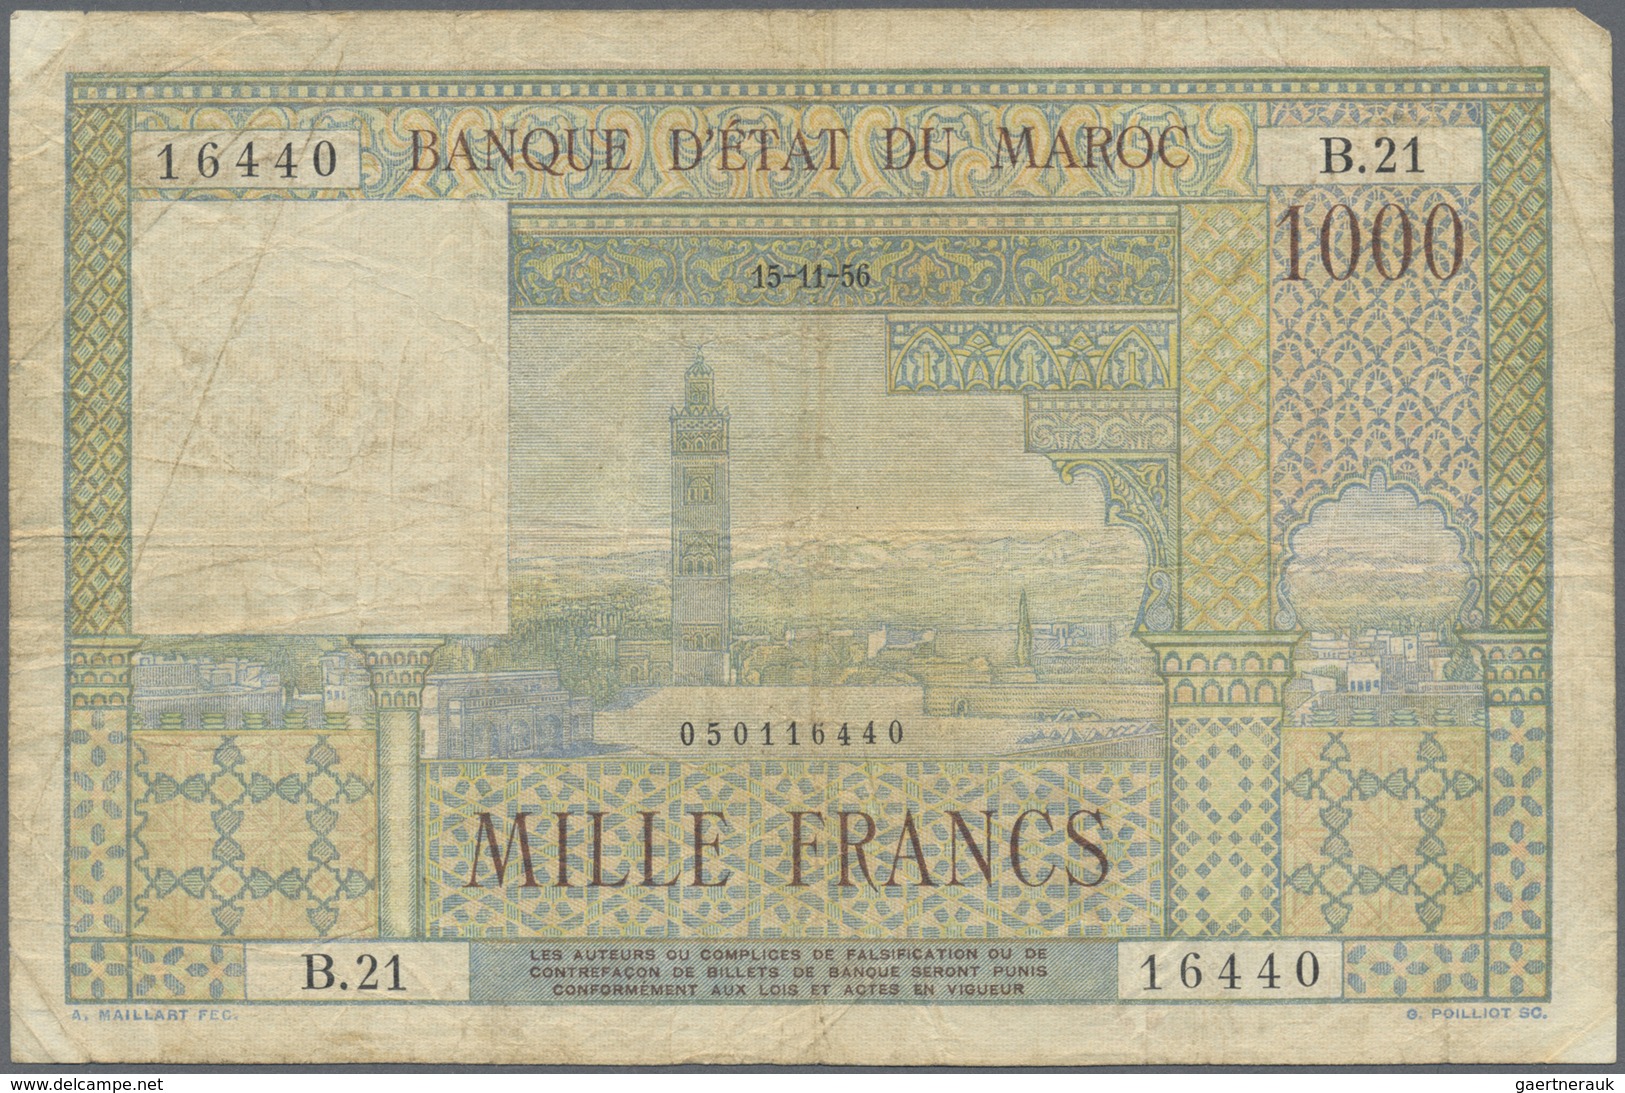 Morocco / Marokko: set of 10 notes 1000 Francs 1952/1956 P. 47, all in used condition with folds, cr